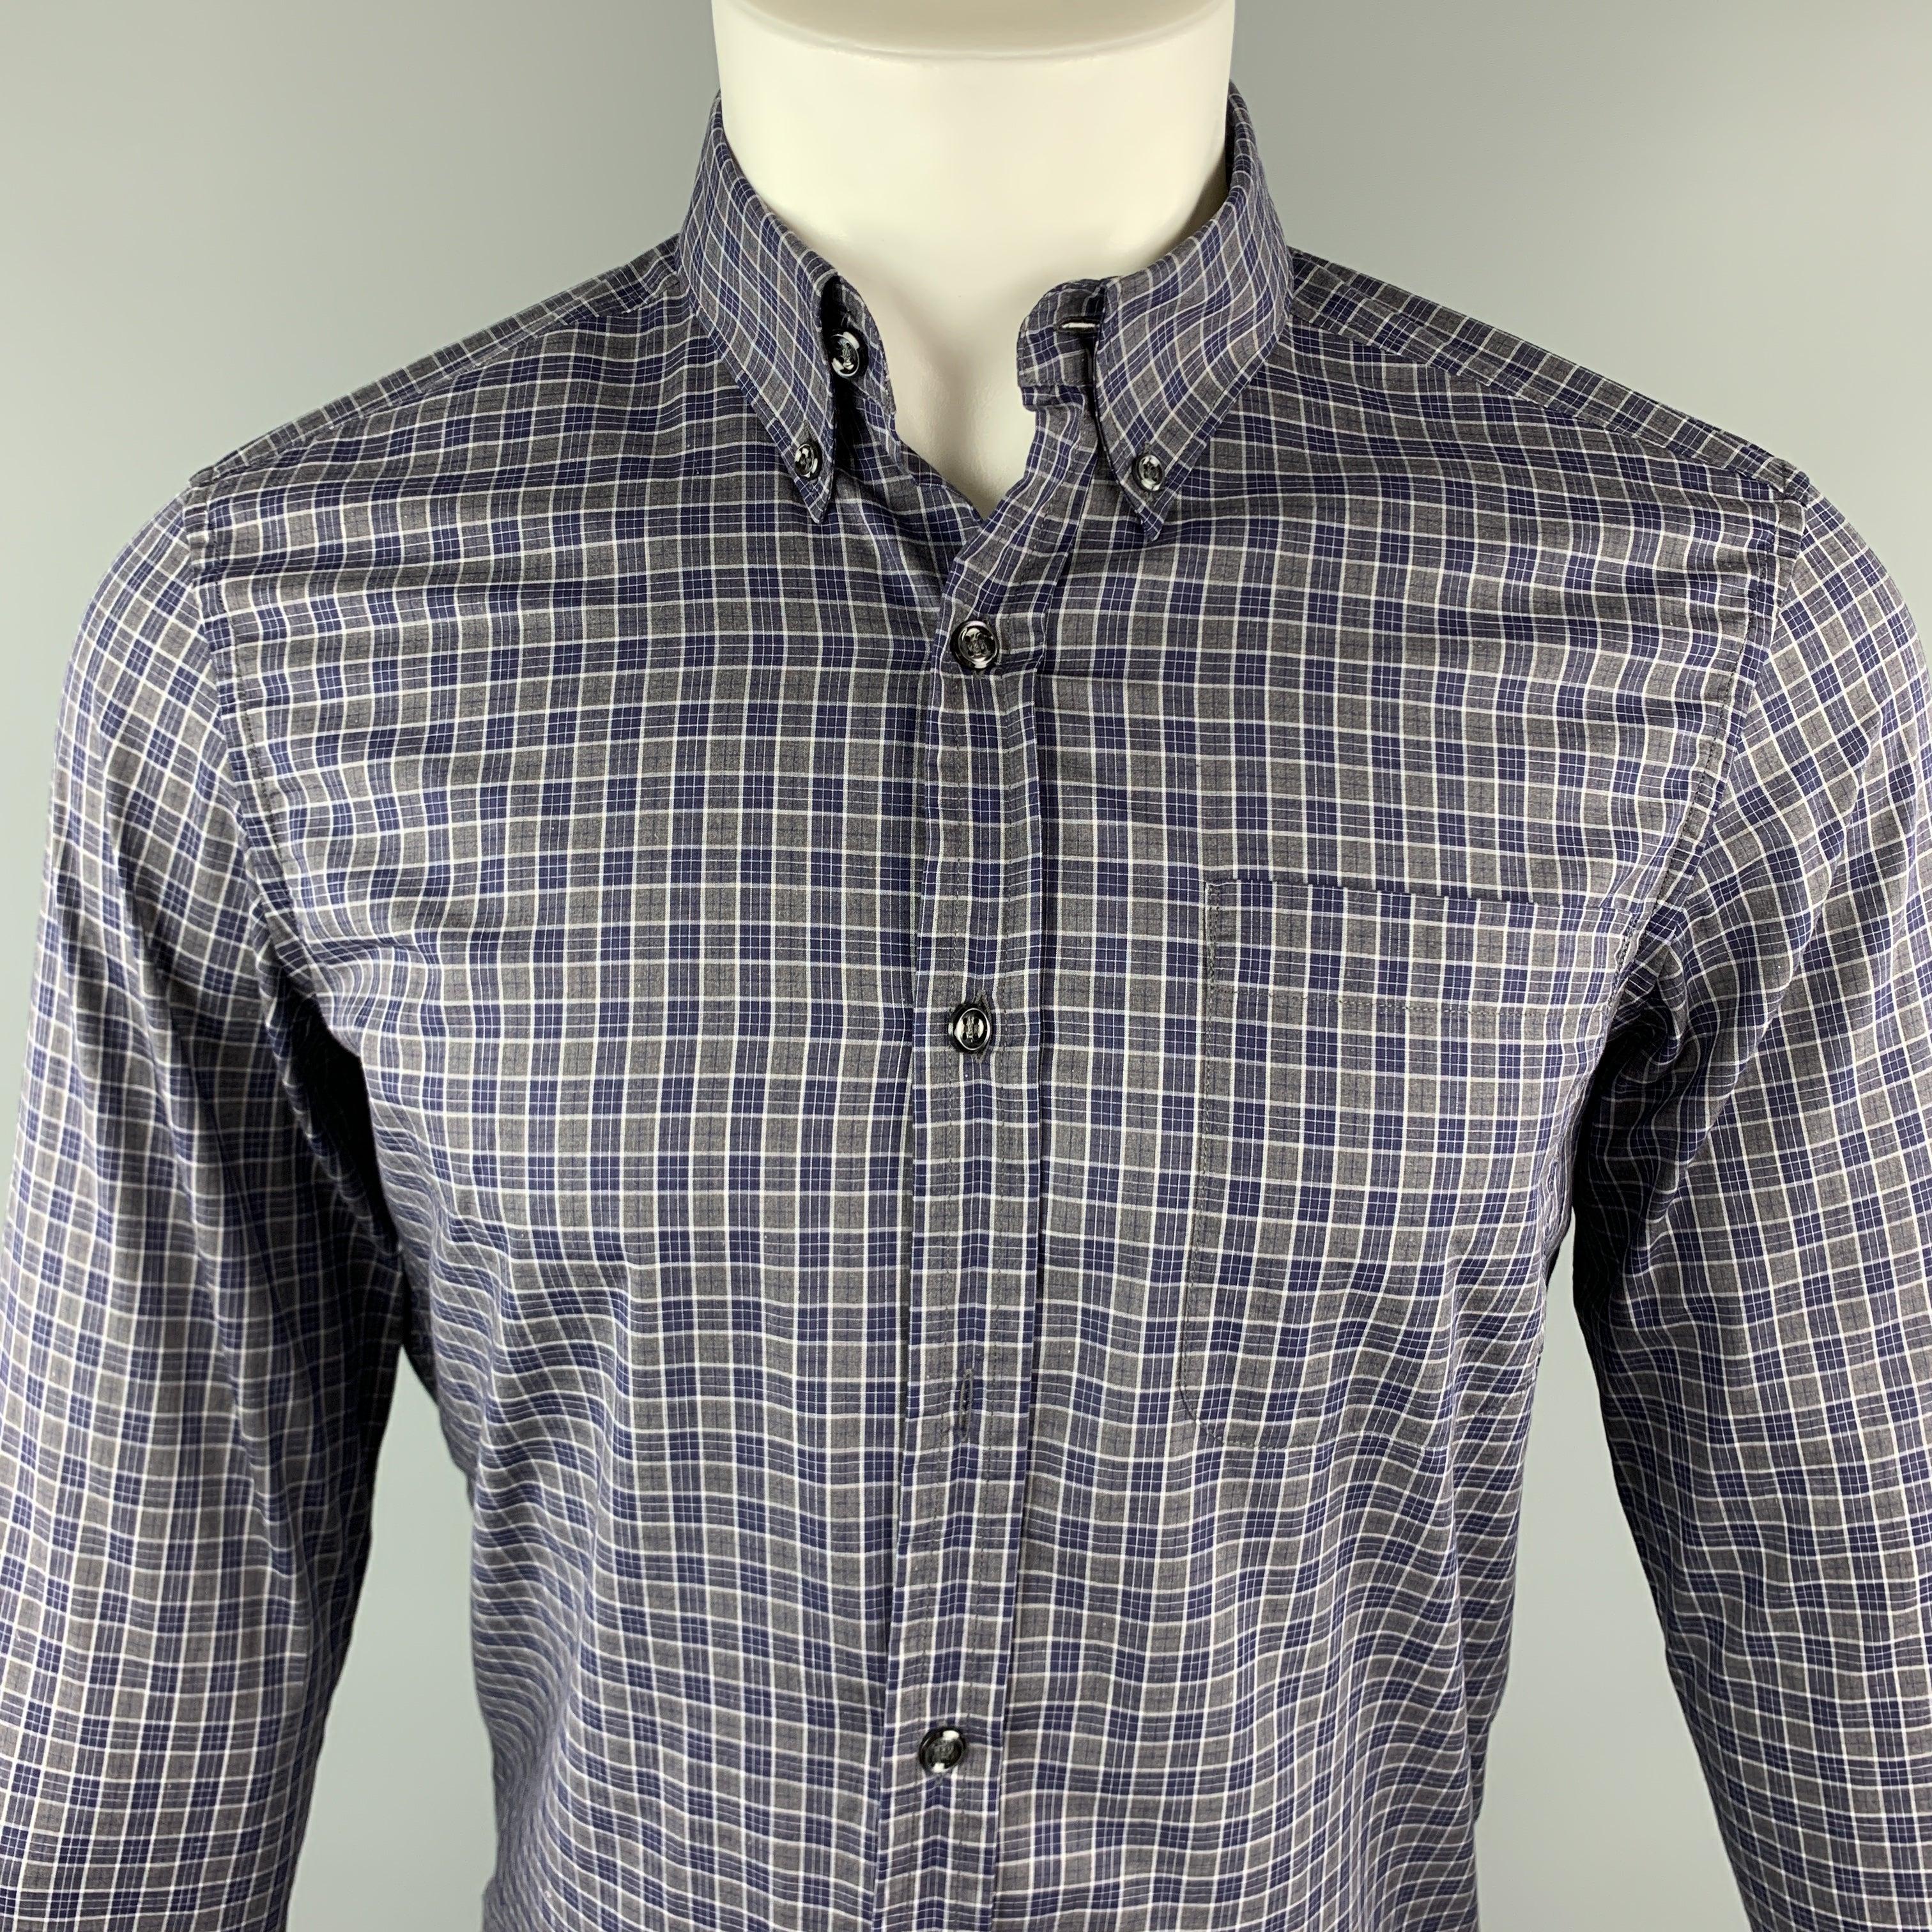 YVES SAINT LAURENT Long Sleeve Shirt comes in gray & navy plaid cotton featuring a button down style, spread collar, a front patch pocket and buttoned cuffs. Missing one button. Made in Italy.Very Good Pre-Owned Condition. 

Marked:   38 / 15